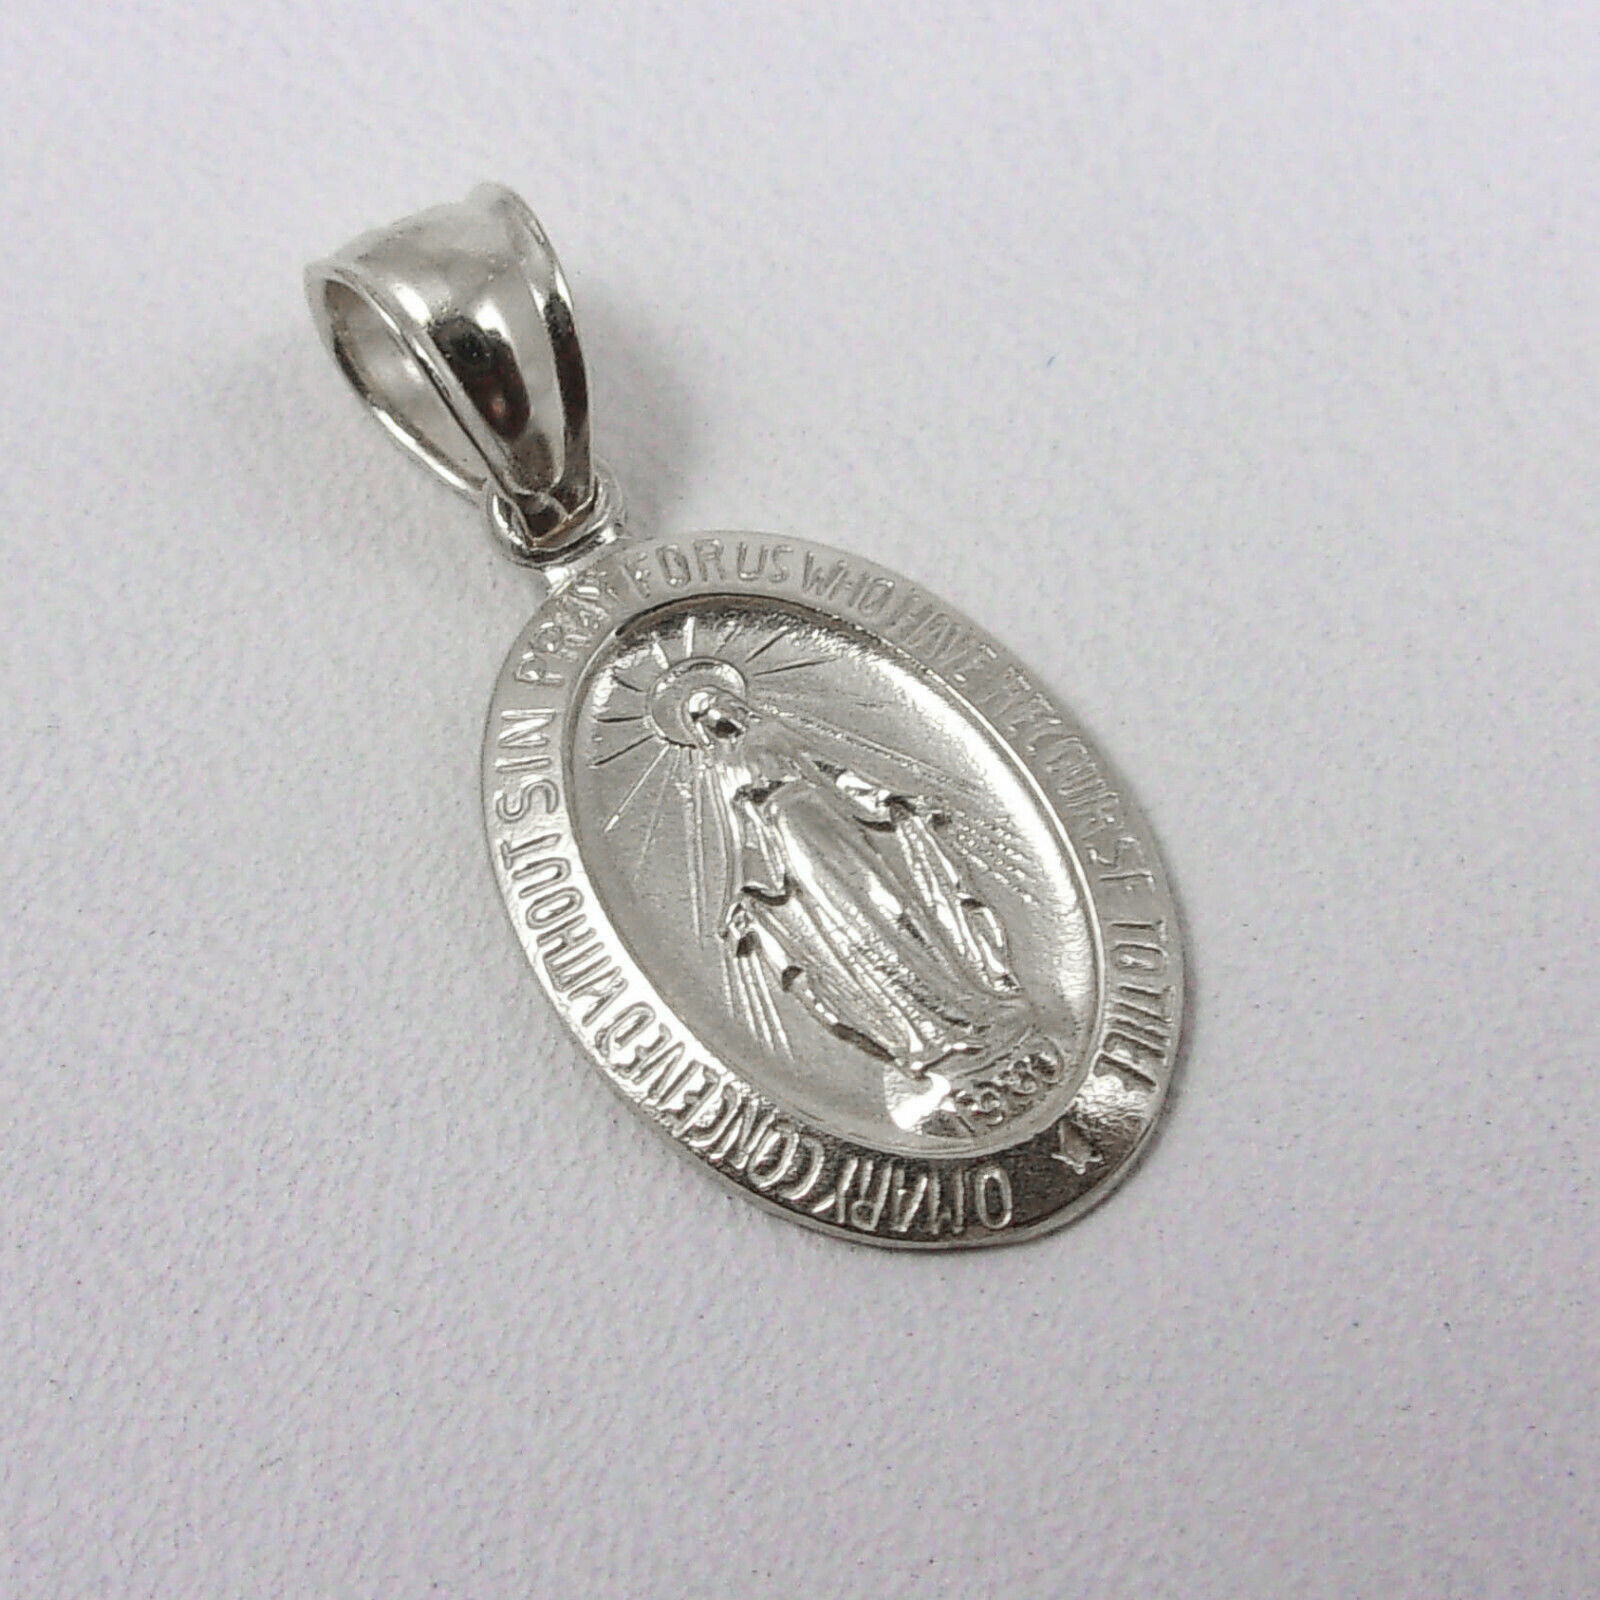 Details about   14k White Gold Polished and Textured Small Miraculous Medal Pendant 